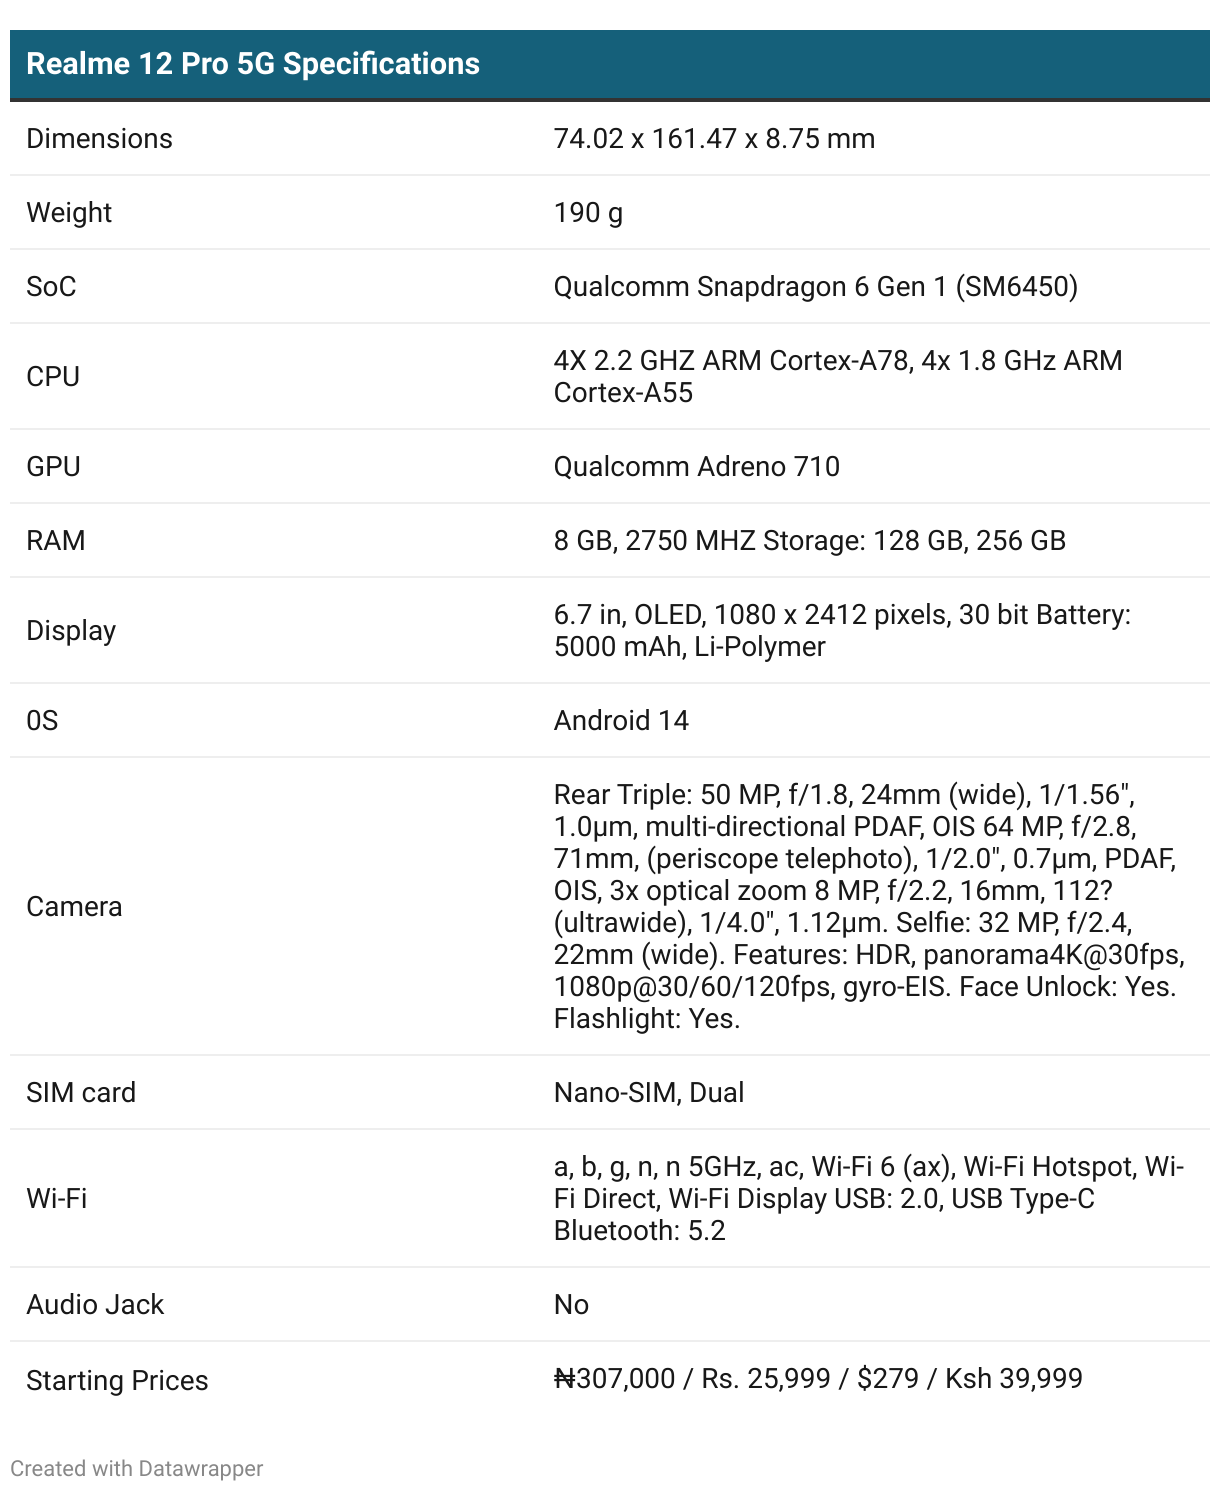 Specs table of the Realme 12 Pro 5G smartphone.